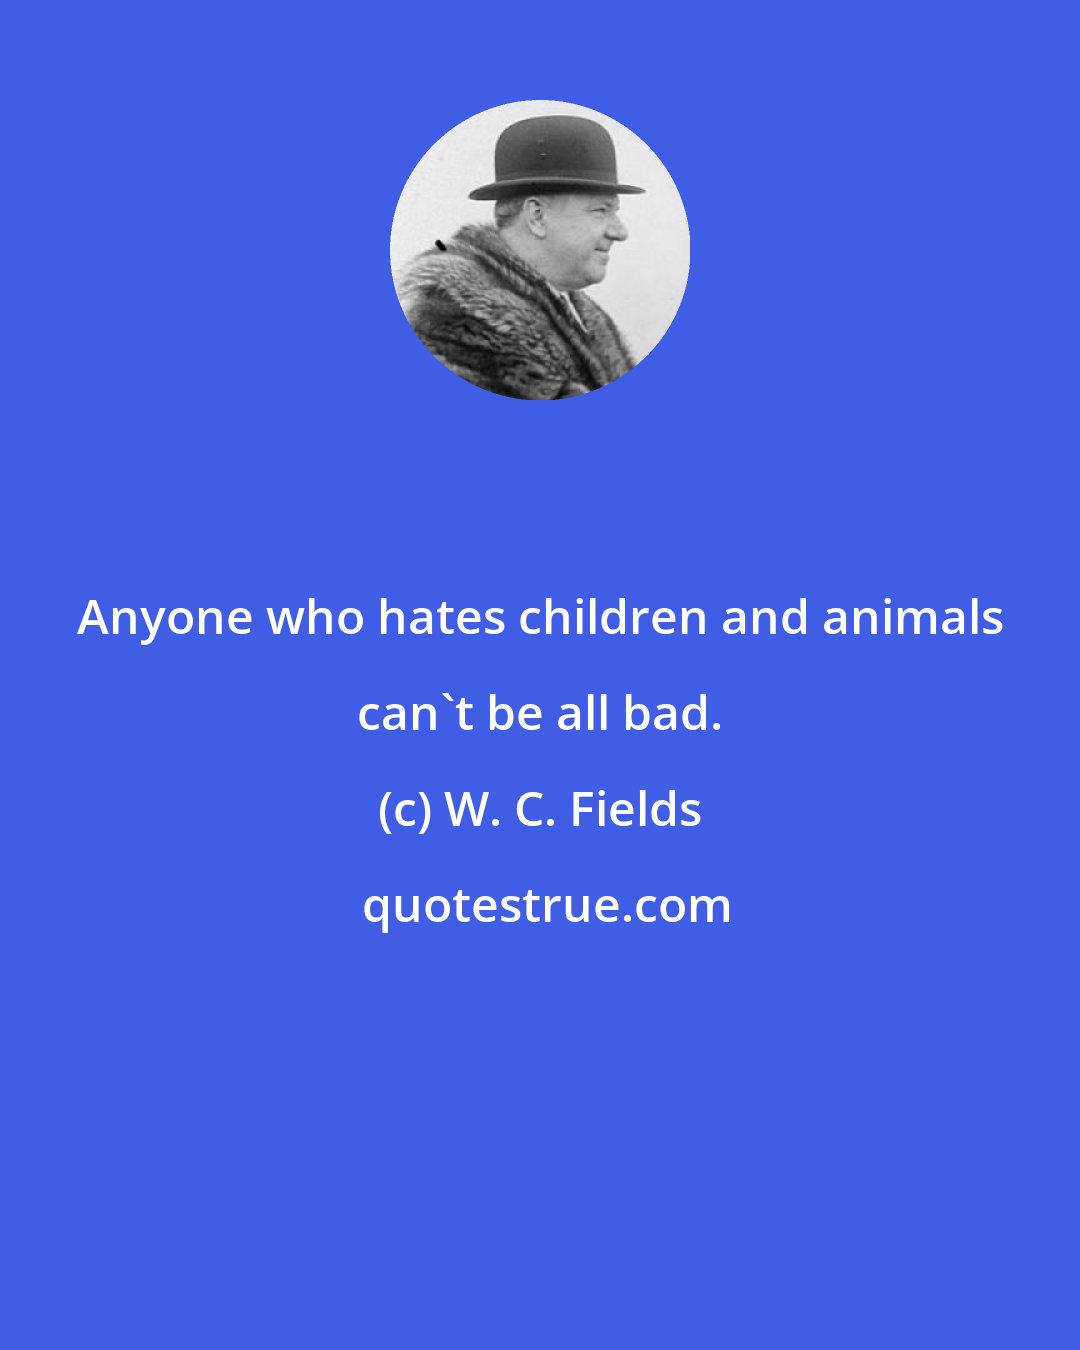 W. C. Fields: Anyone who hates children and animals can't be all bad.